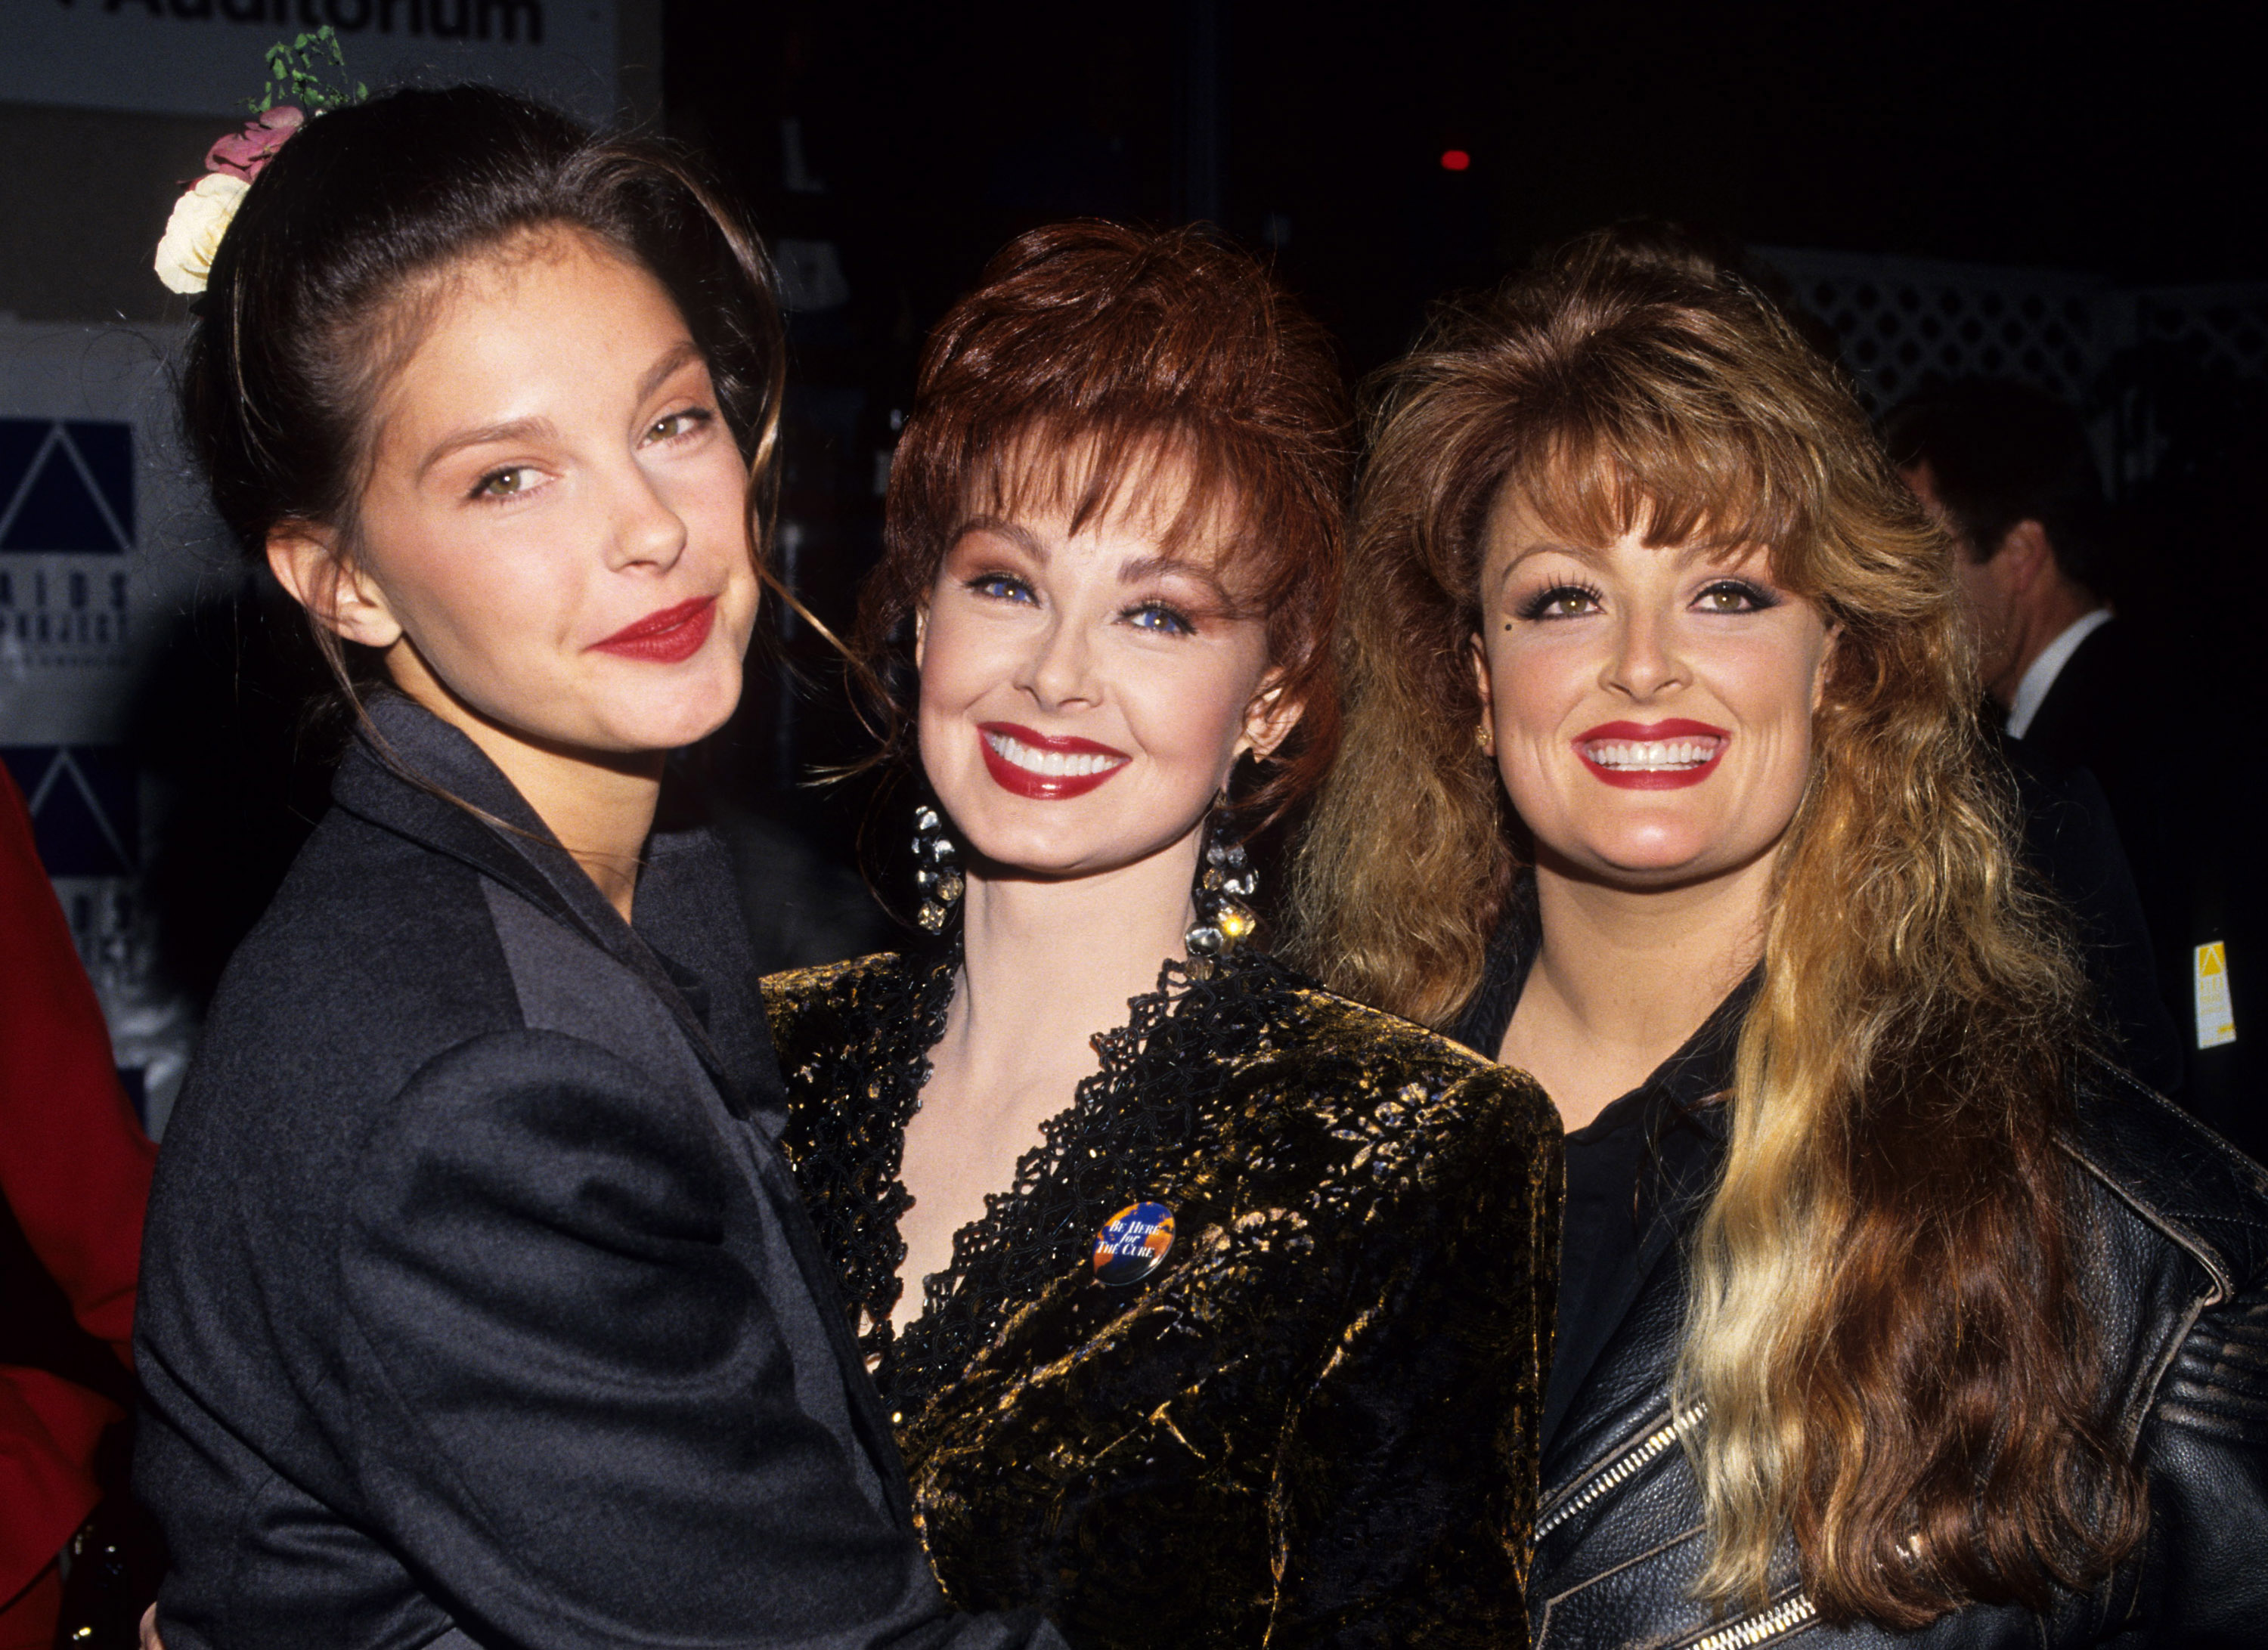 Ashley, Naomi, and Wynonna Judd at APLA's 6th Commitment to Life Concert Benefit in Universal City, California in 1992 | Source: Getty Images